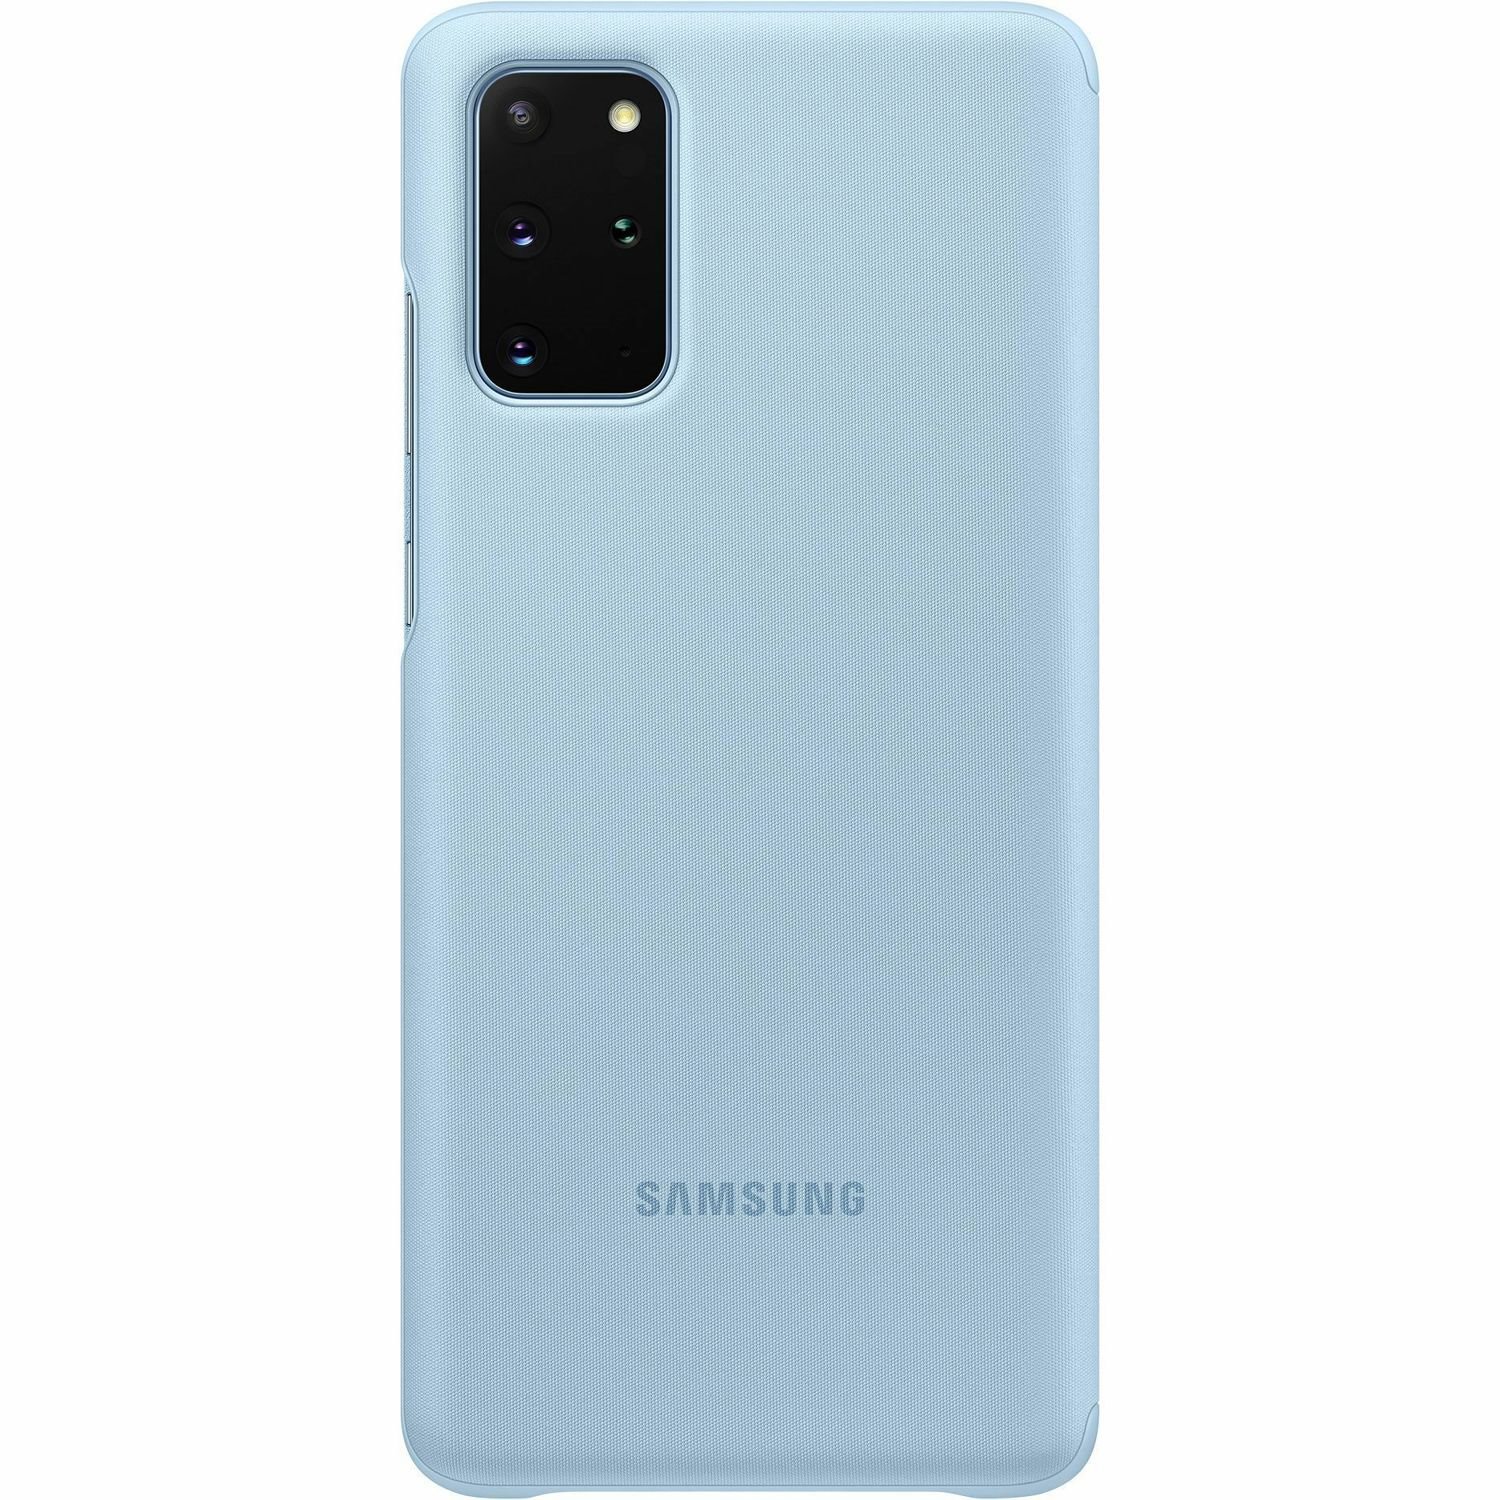 Samsung Smart Clear View Carrying Case (Flap) Samsung Galaxy S20+ 5G Smartphone - Blue Coral